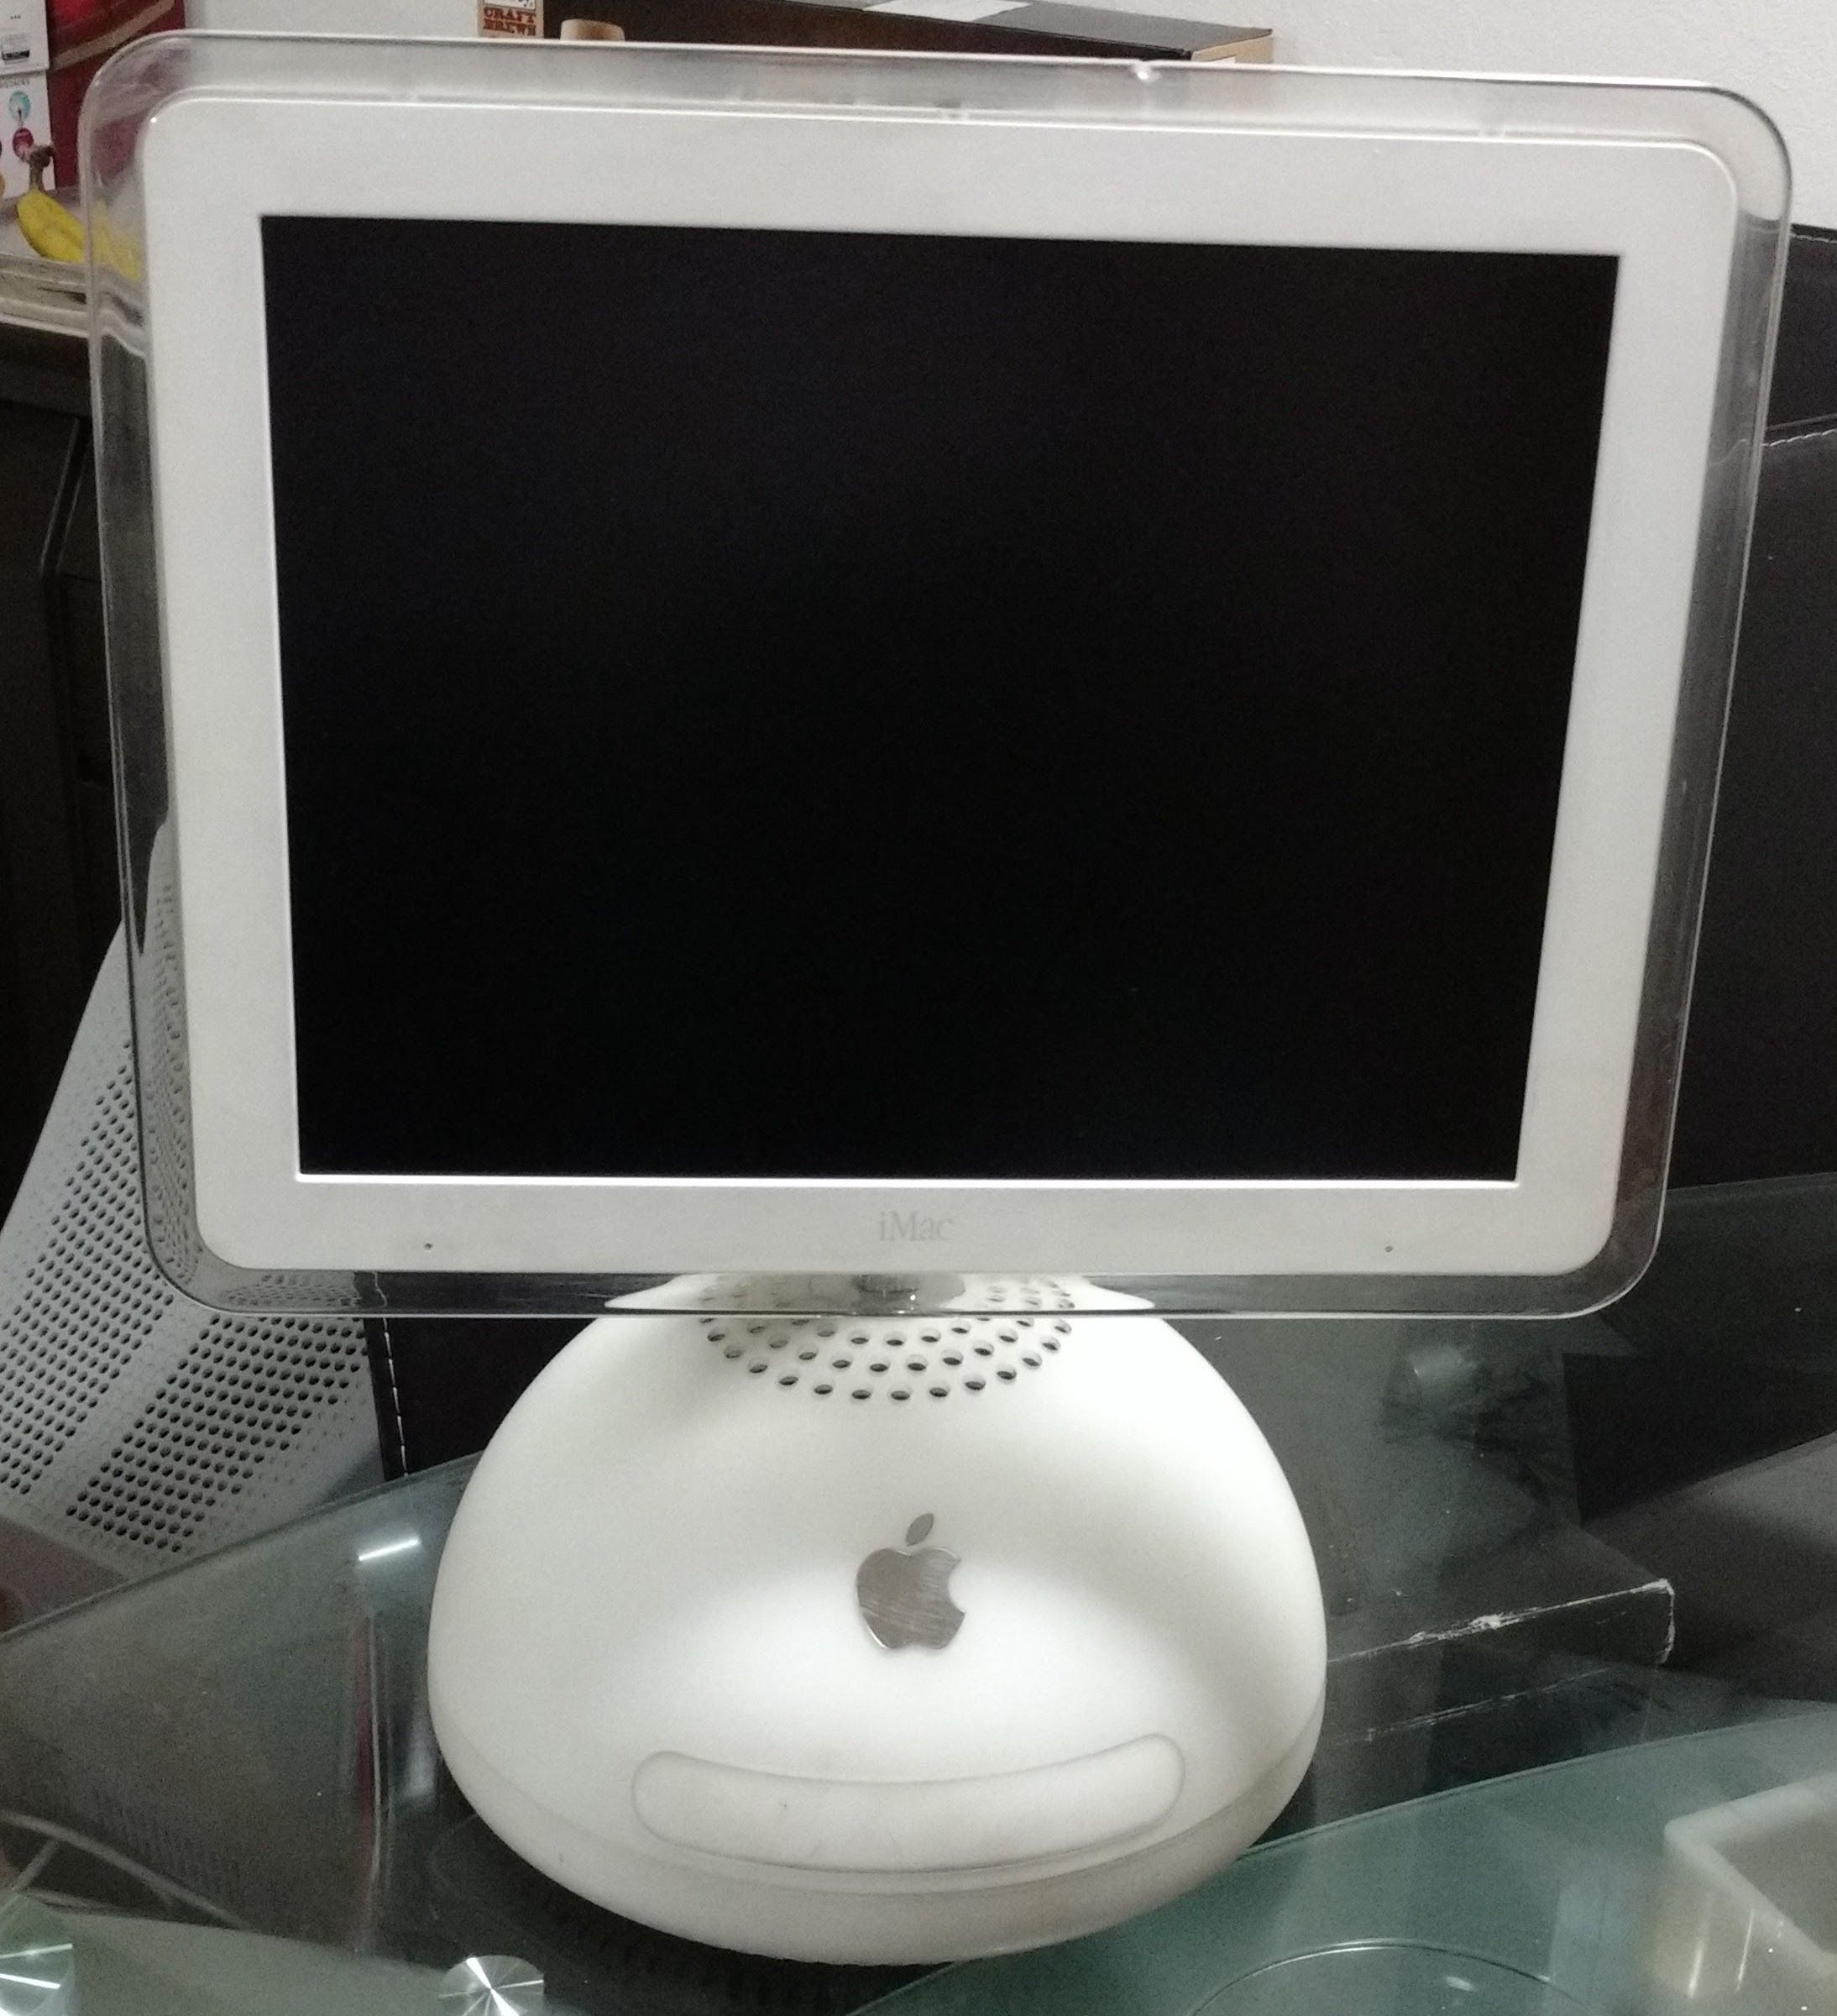 What Use Could I Give To An Old But Working Imac G4 Lamp Like Model Steemit